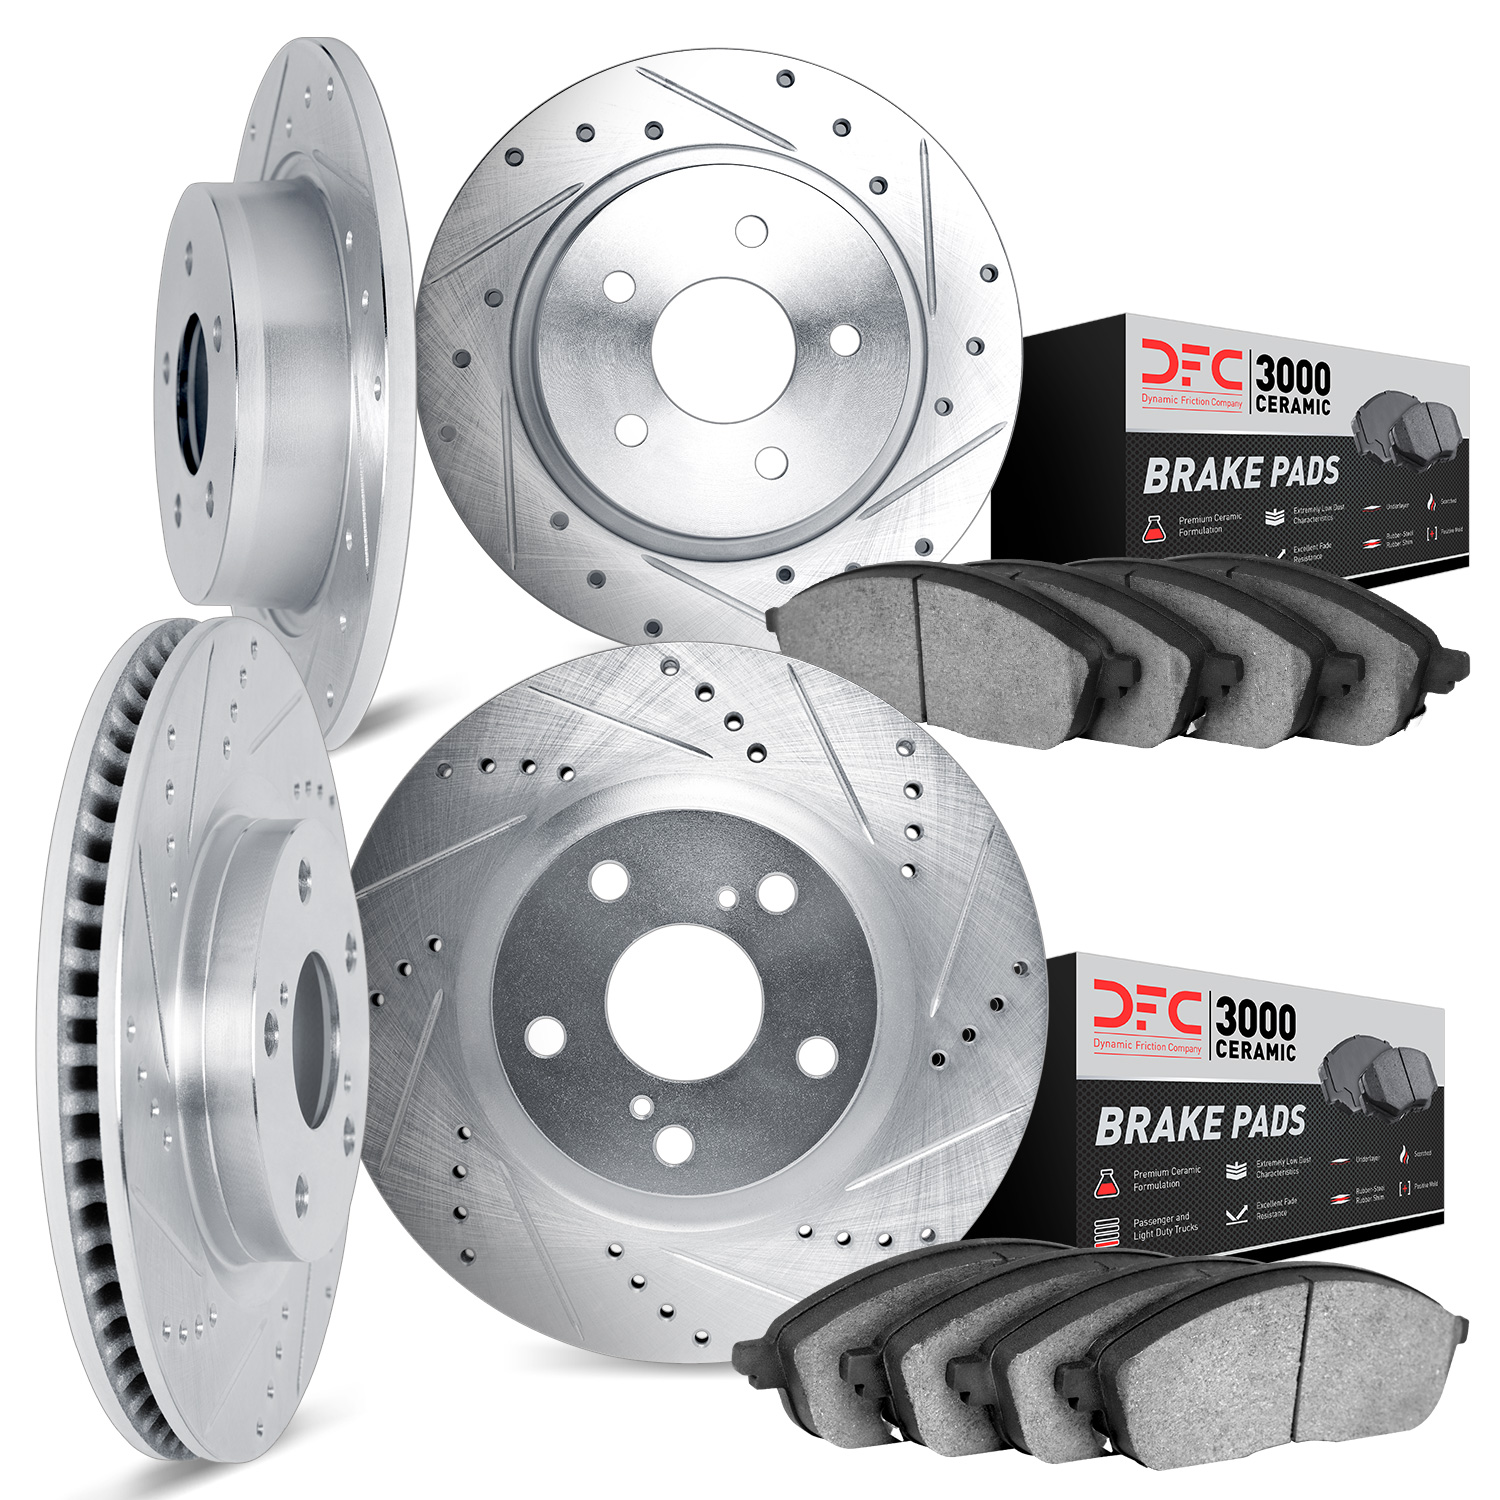 7304-80031 Drilled/Slotted Brake Rotor with 3000-Series Ceramic Brake Pads Kit [Silver], 2006-2007 Ford/Lincoln/Mercury/Mazda, P